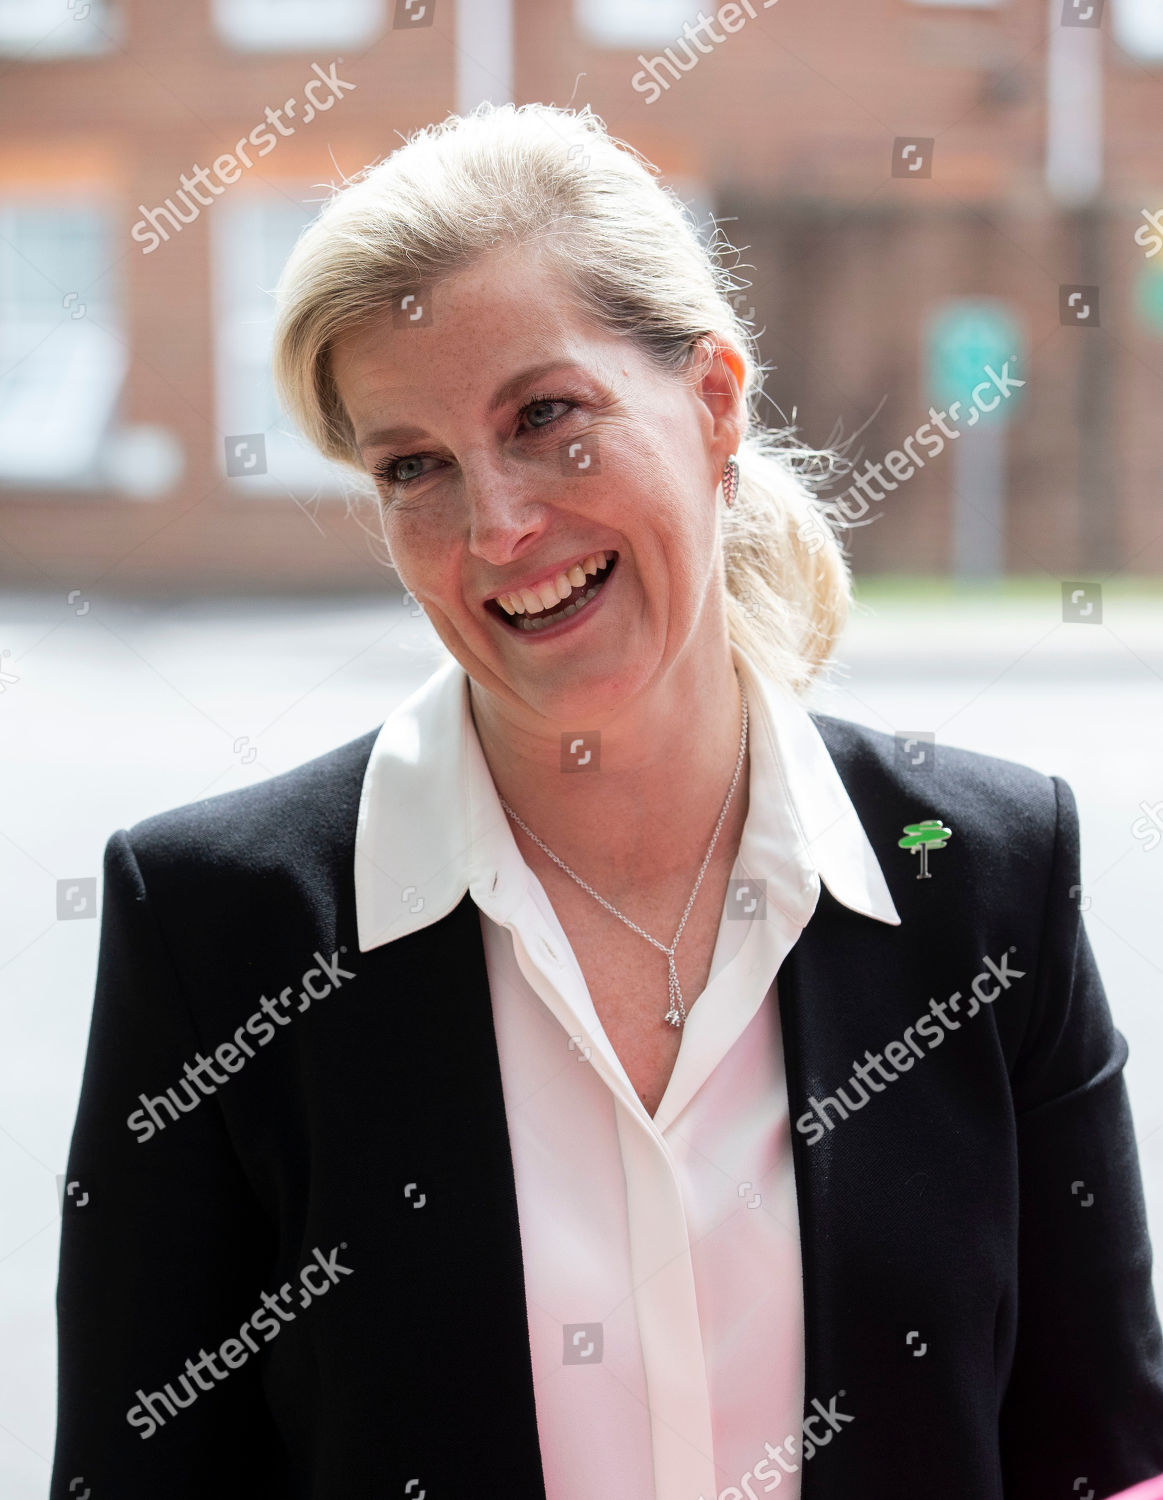 sophie-countess-of-wessex-visits-the-treloar-trust-college-holybourne-uk-shutterstock-editorial-10279529i.jpg